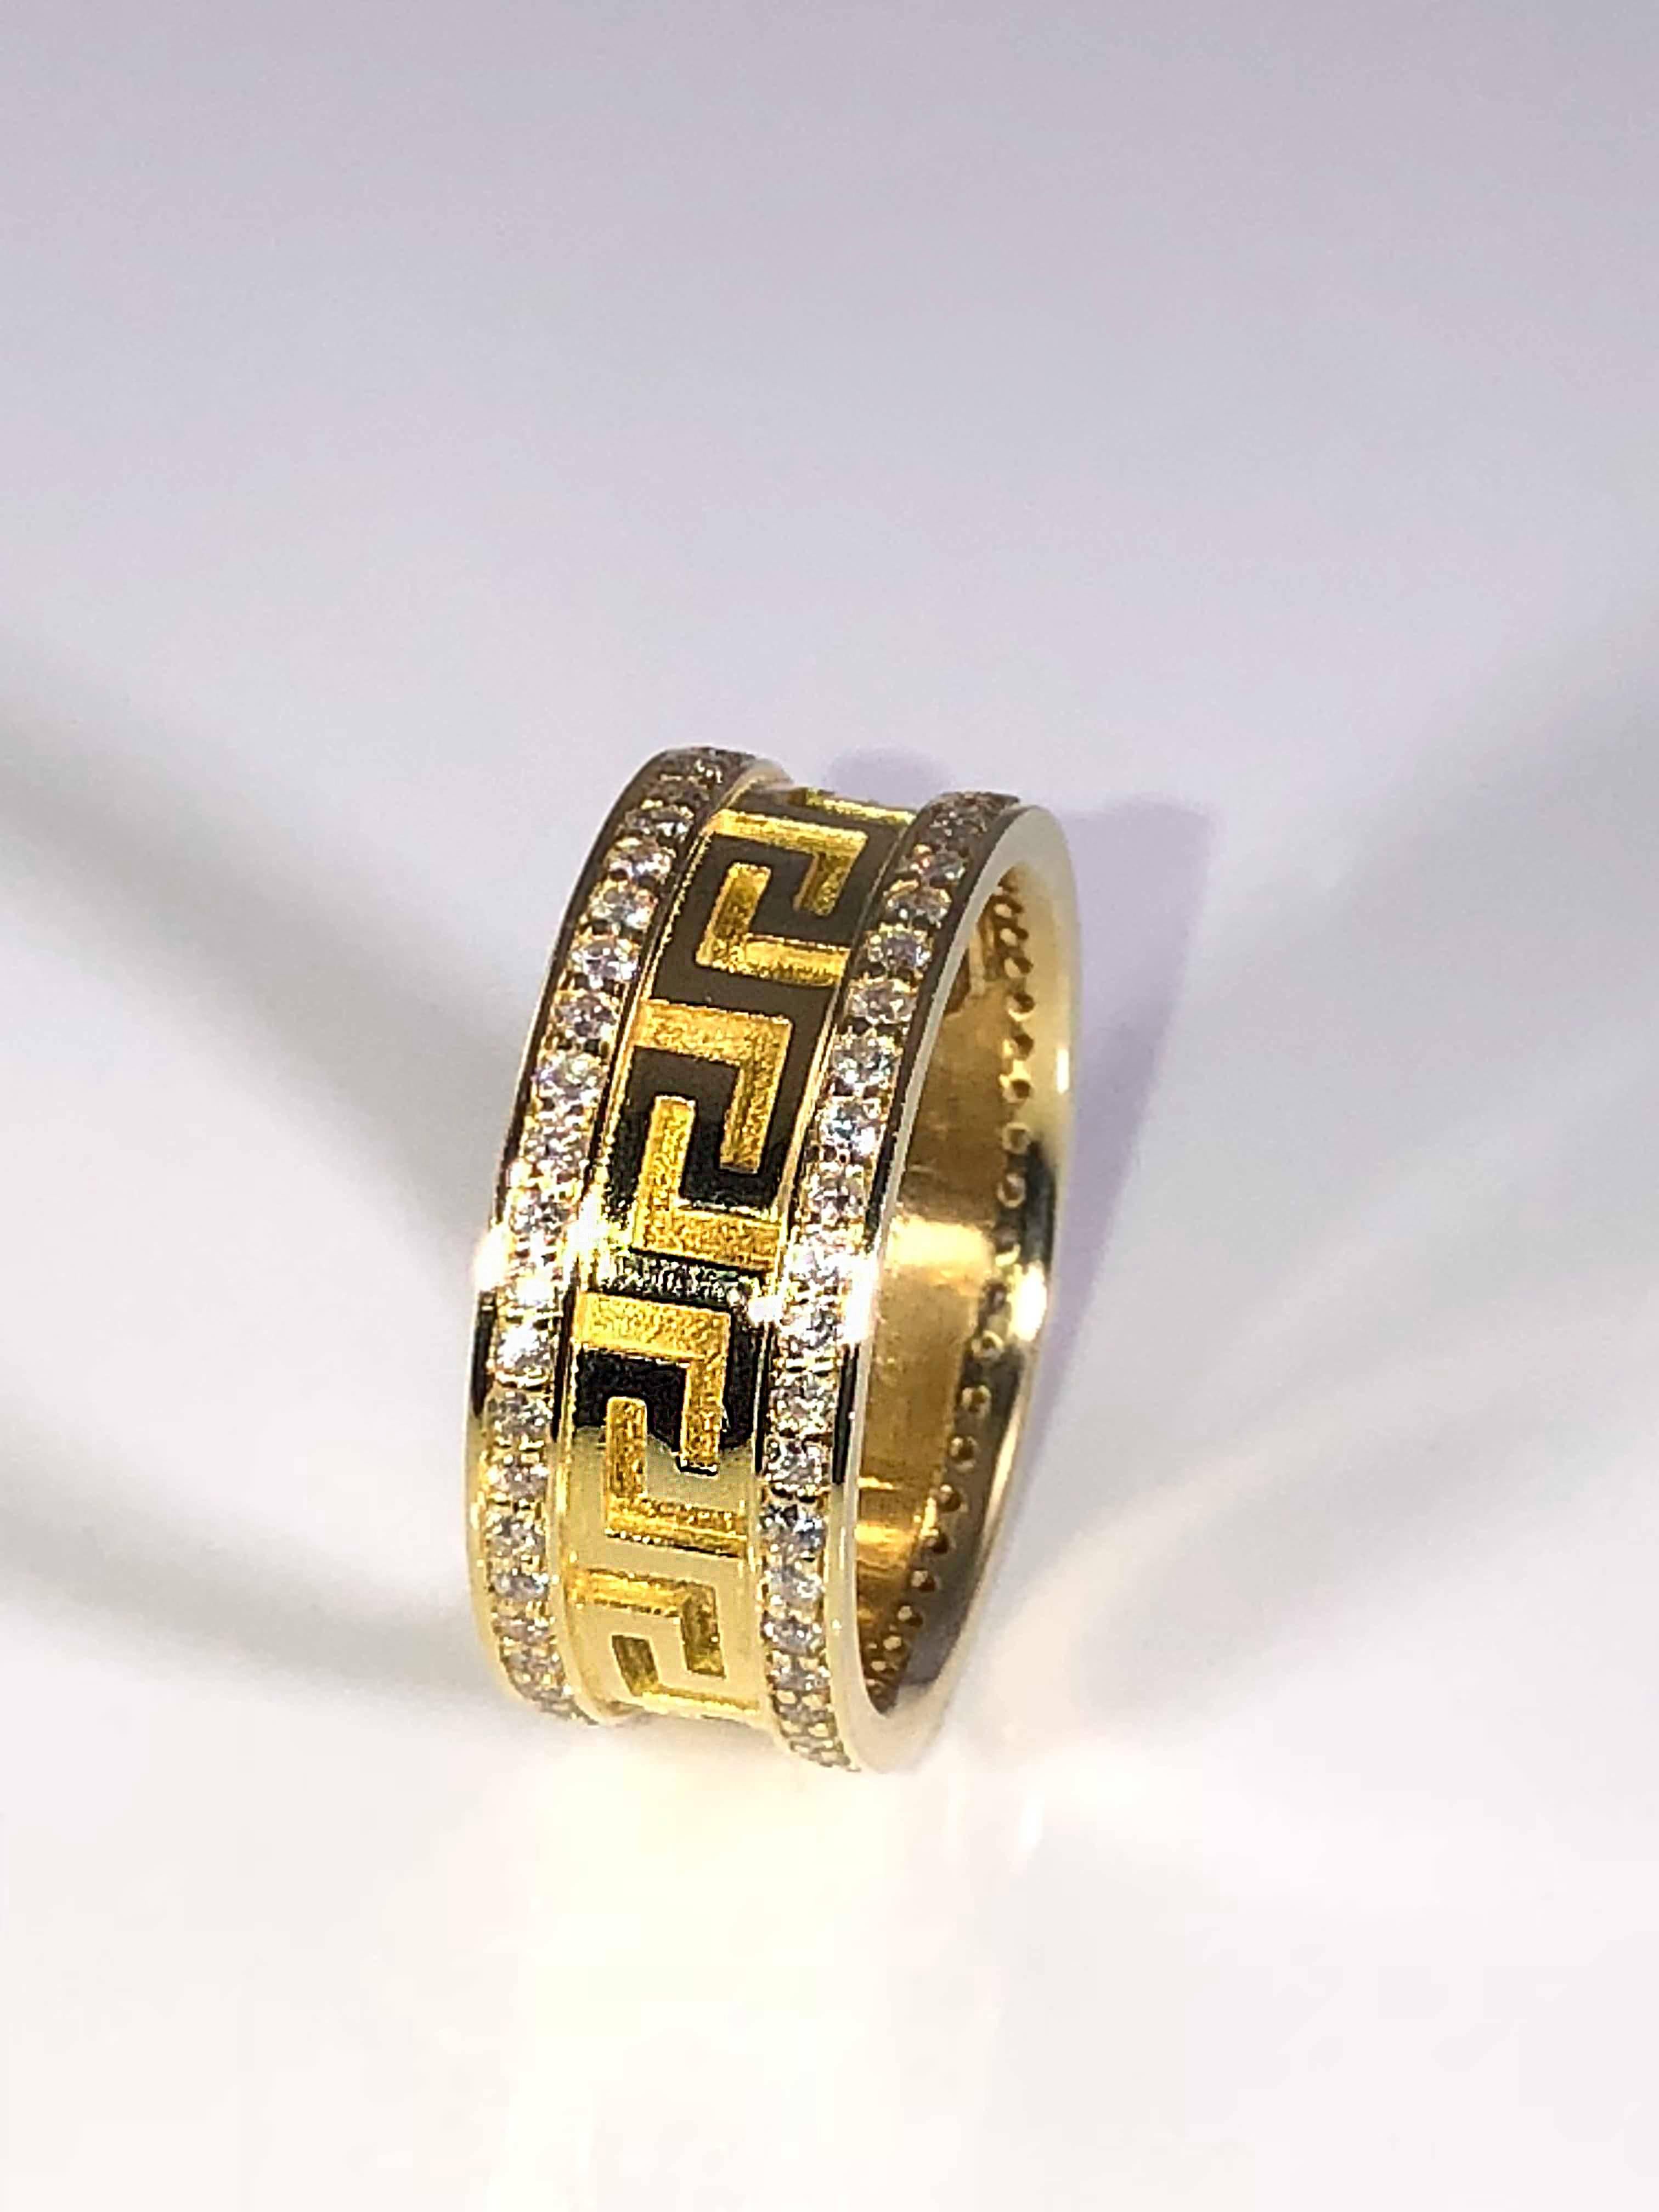 S.Georgios designer solid yellow gold 18 karat band is all handmade and has the design of the Greek Key all the way around without a beginning or an end. The design symbolizes the key to eternal life.
The gorgeous ring has a unique velvet look on